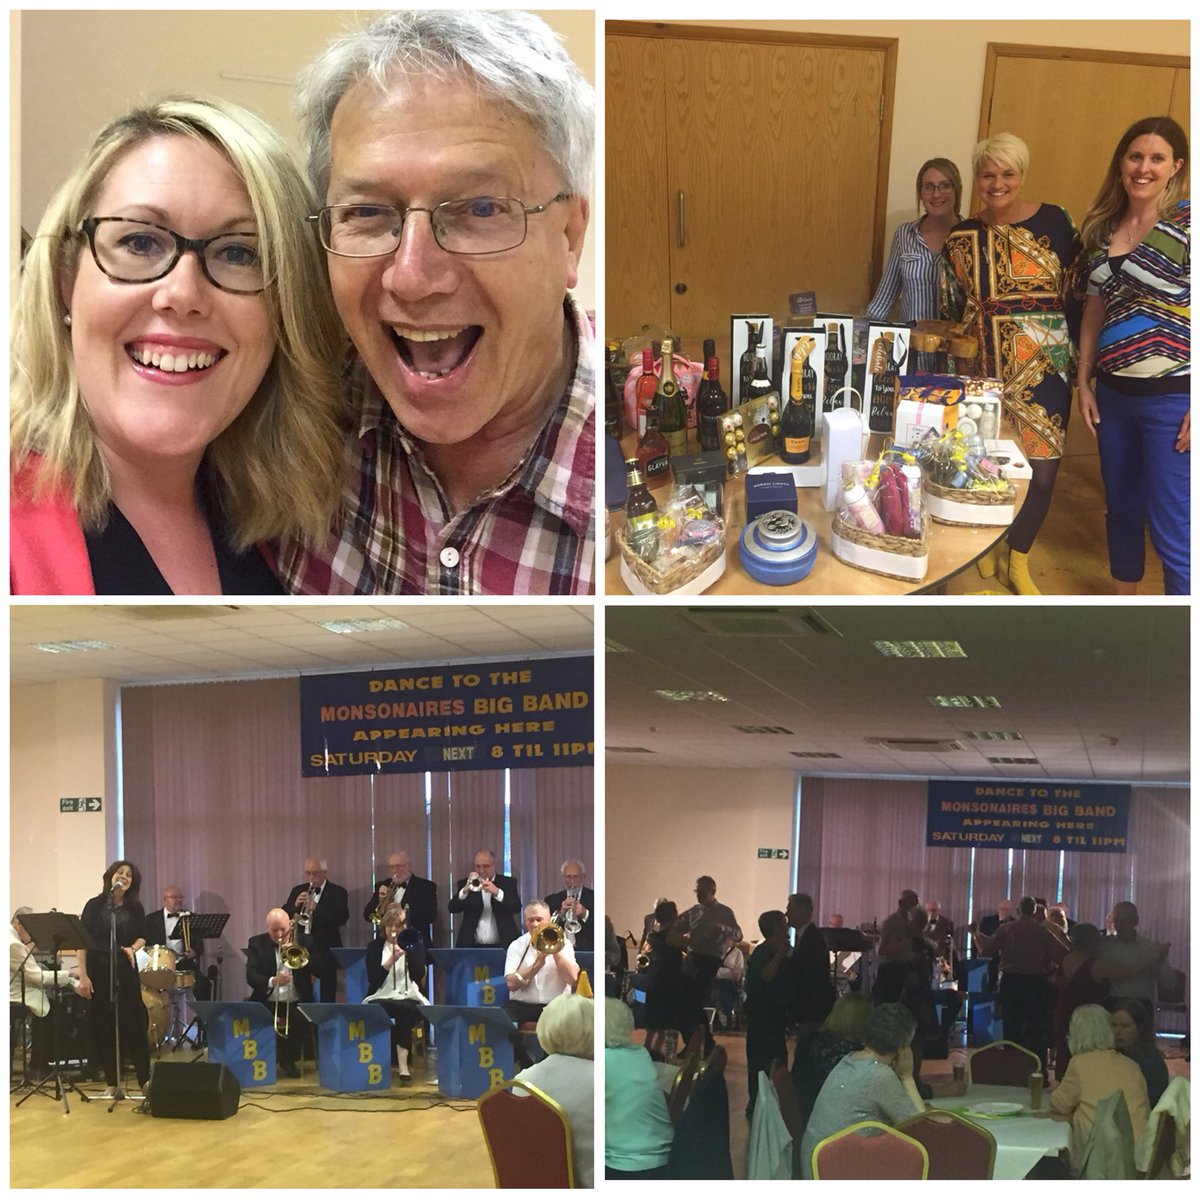 Having an enjoyable evening helping at the Newark Dementia Carers Group Grand Summer Dance - seeing everyone enjoy & dance to the fantastic Monsonaires Band. Also very star struck meeting the lovely Chris and Jane from @Vicky_McClure  #OurDementiaChoir #volunteeringmatters